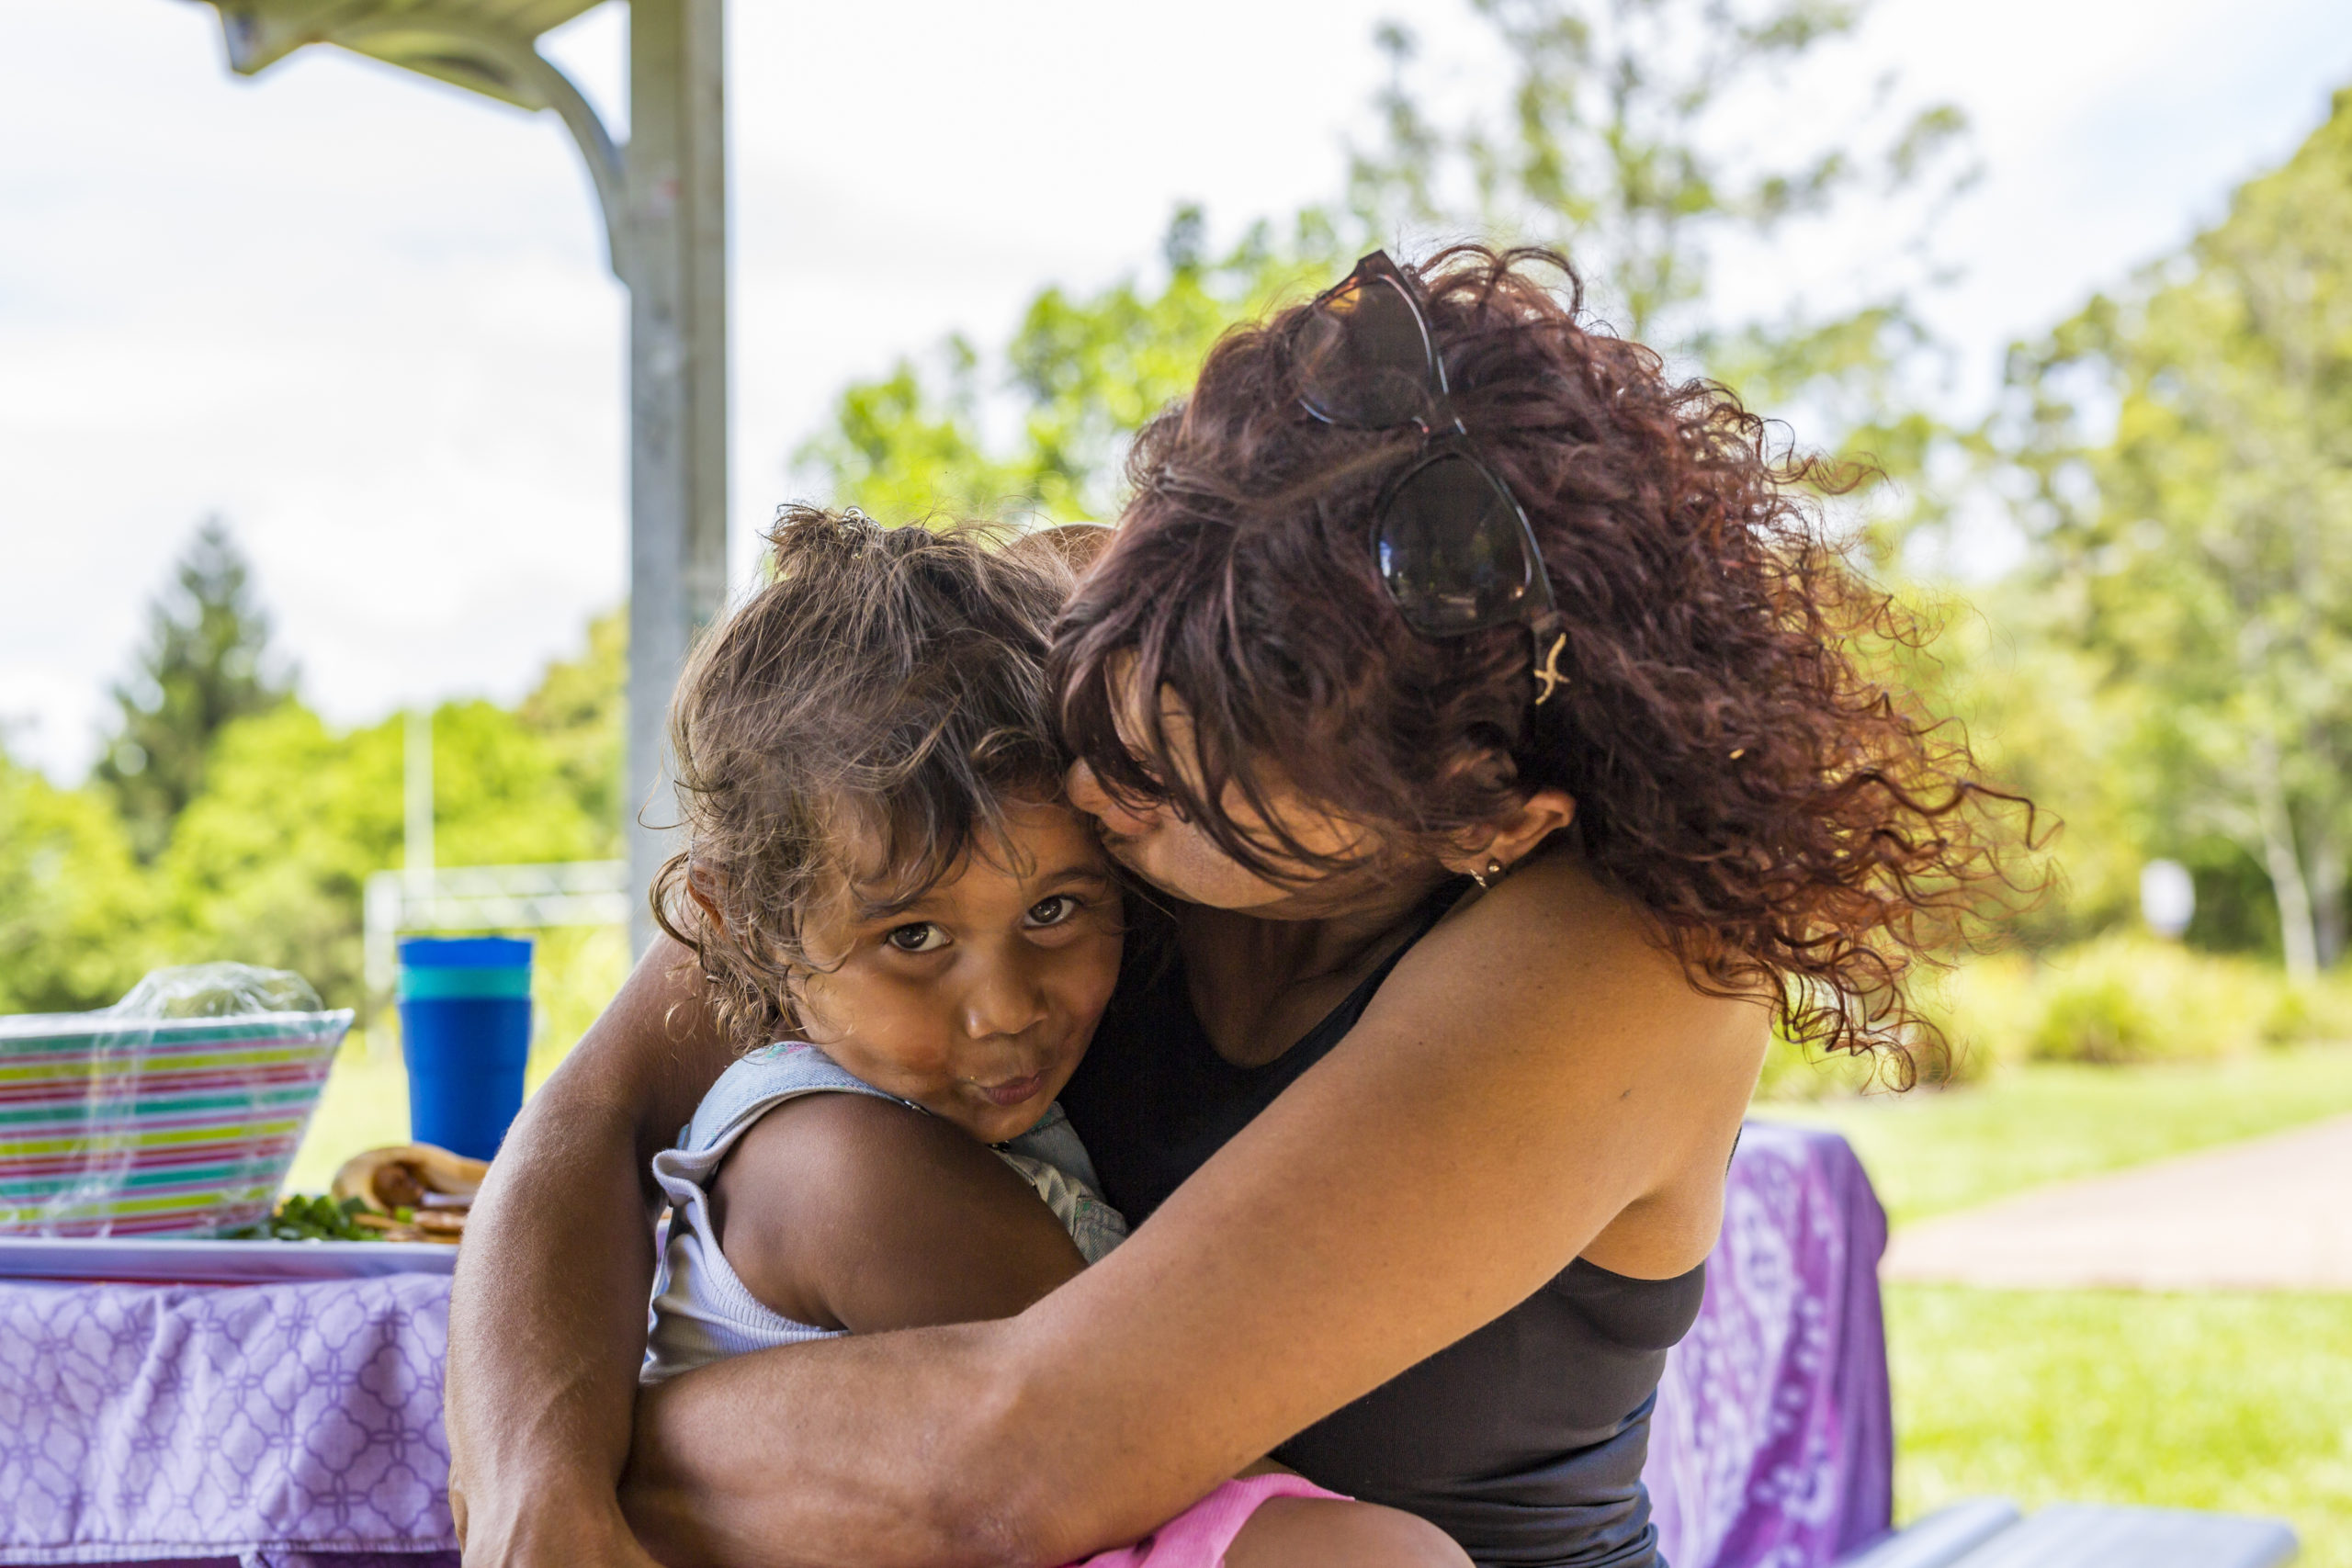 Australian Aboriginal woman giving her granddaughter a hug in the park